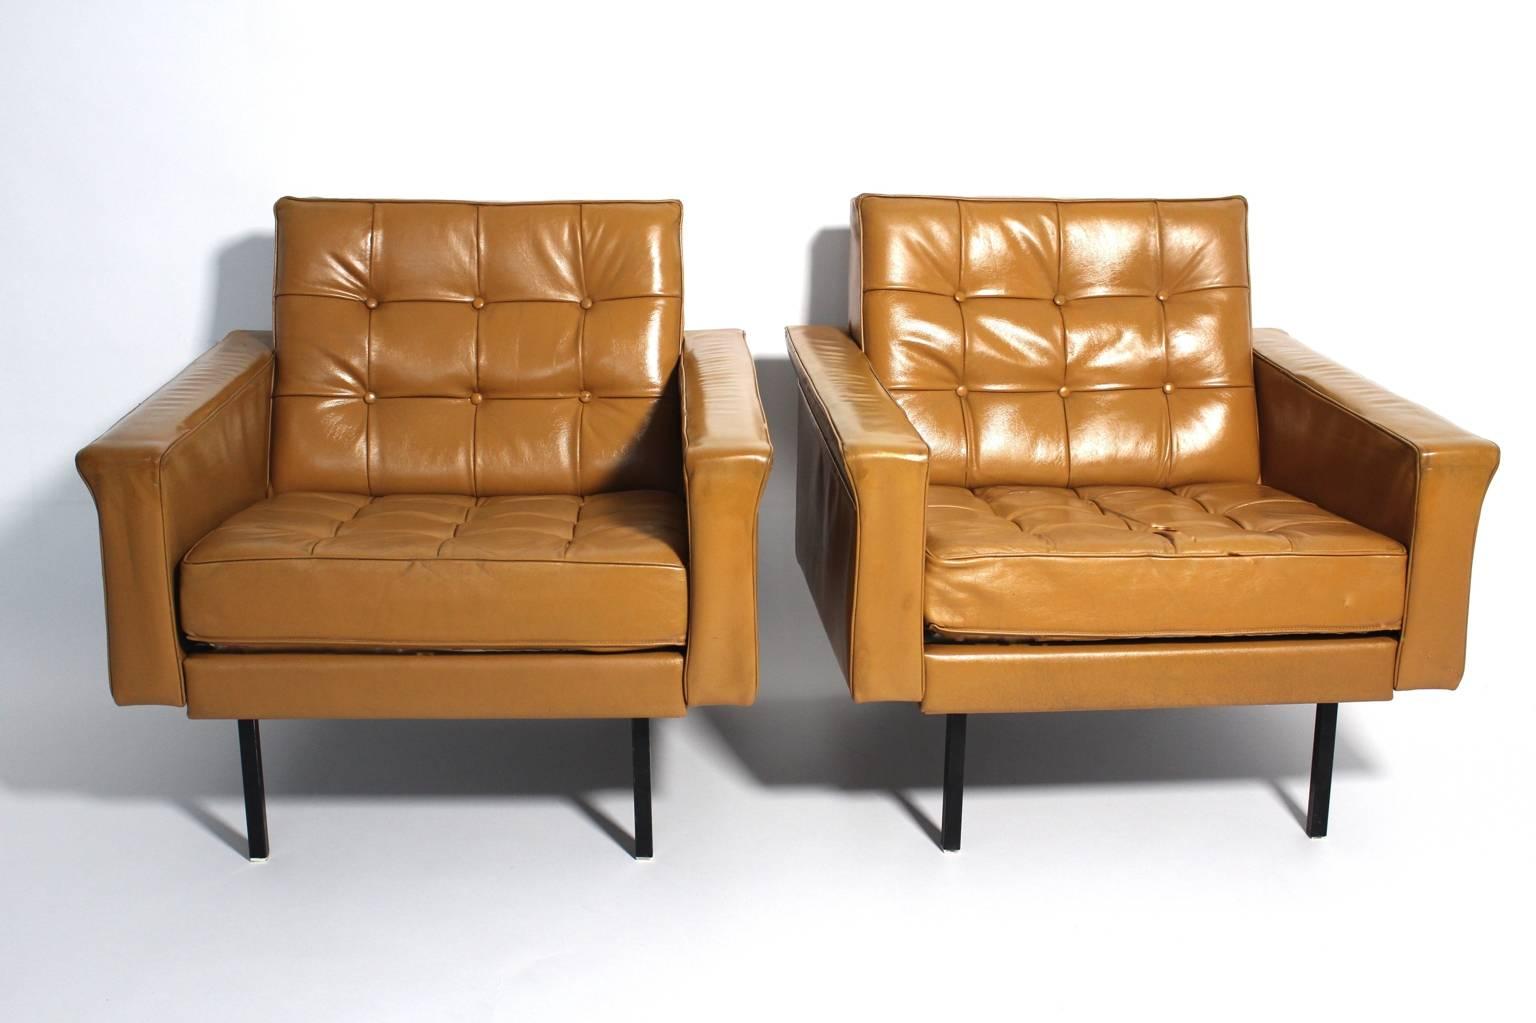 Mid-Century Modern pair of brown vintage leather club chairs by Johannes Spalt, Vienna, 1959 and executed by Franz Wittmann, Austria. Johannes Spalt created many designs for Wittmann.
These armchairs are covered with the original light-brown leather